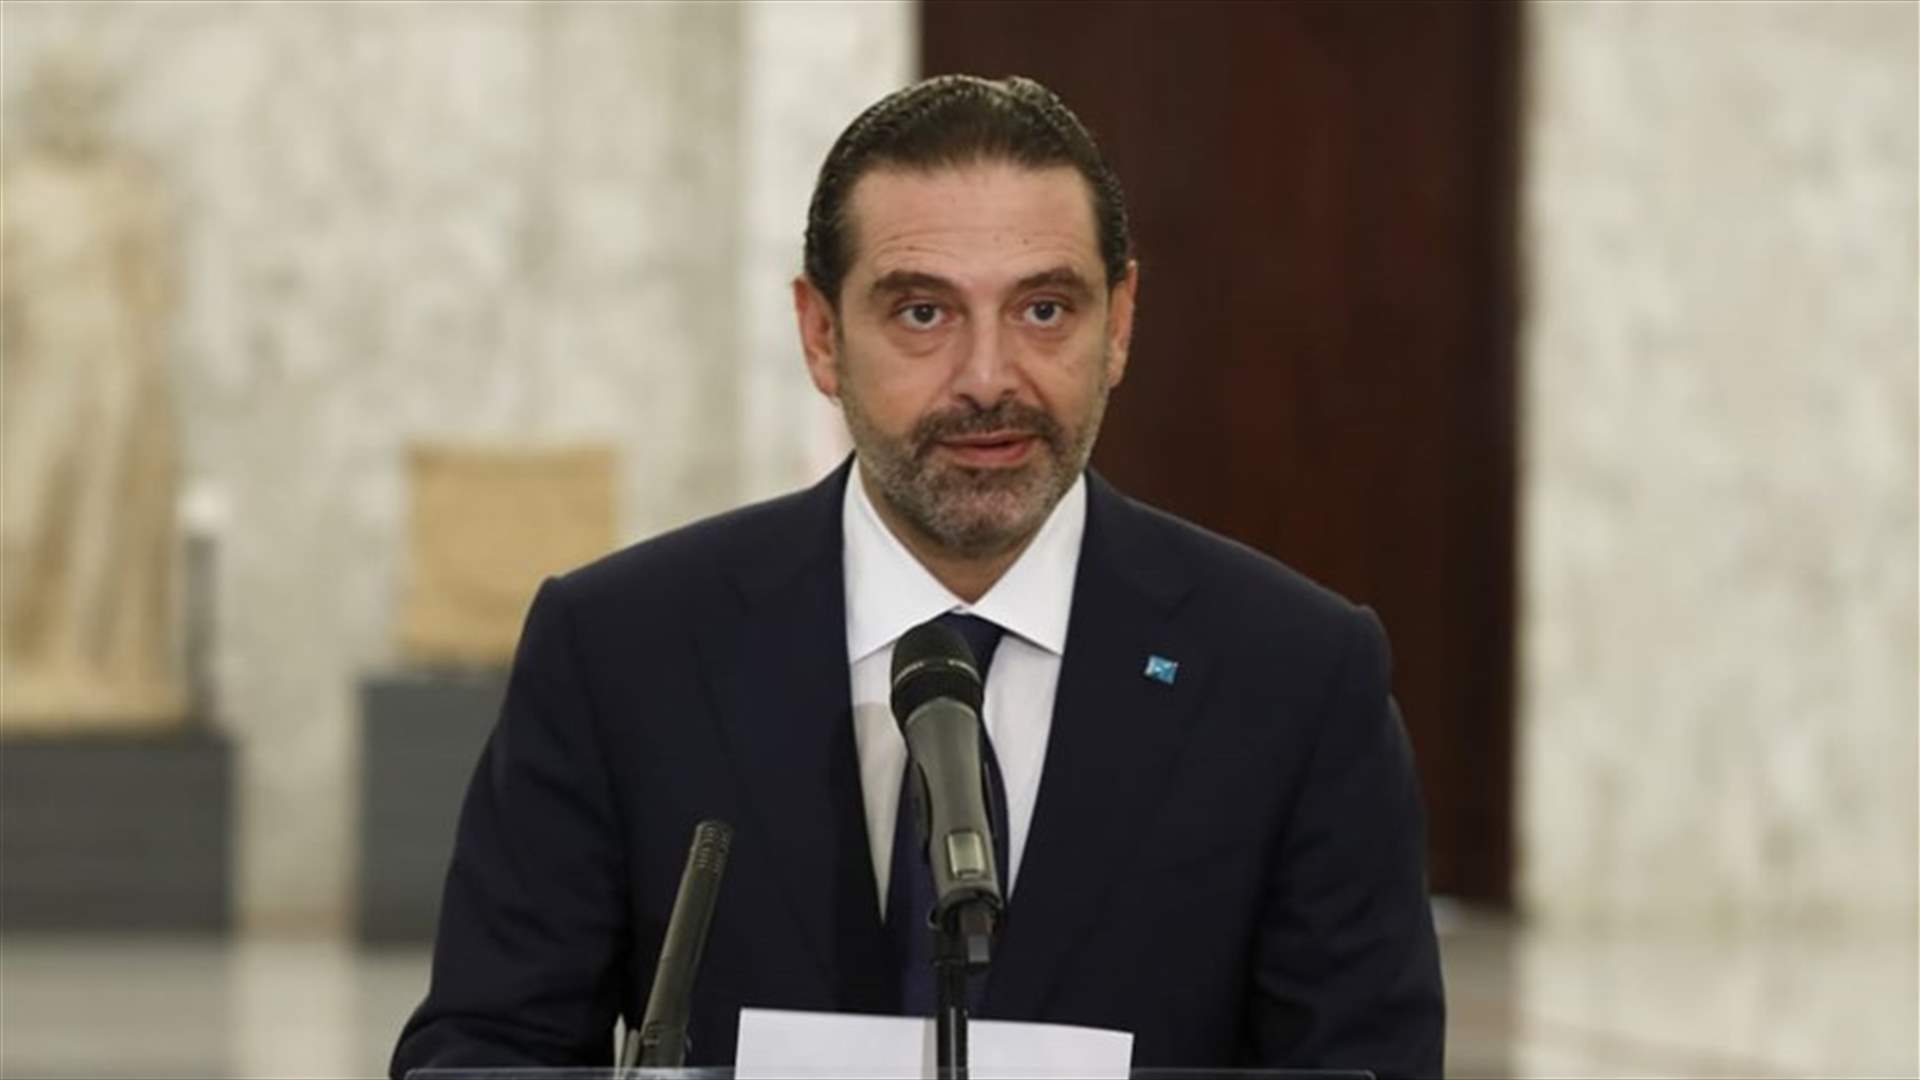 Hariri vows to form new government quickly, stop economic collapse